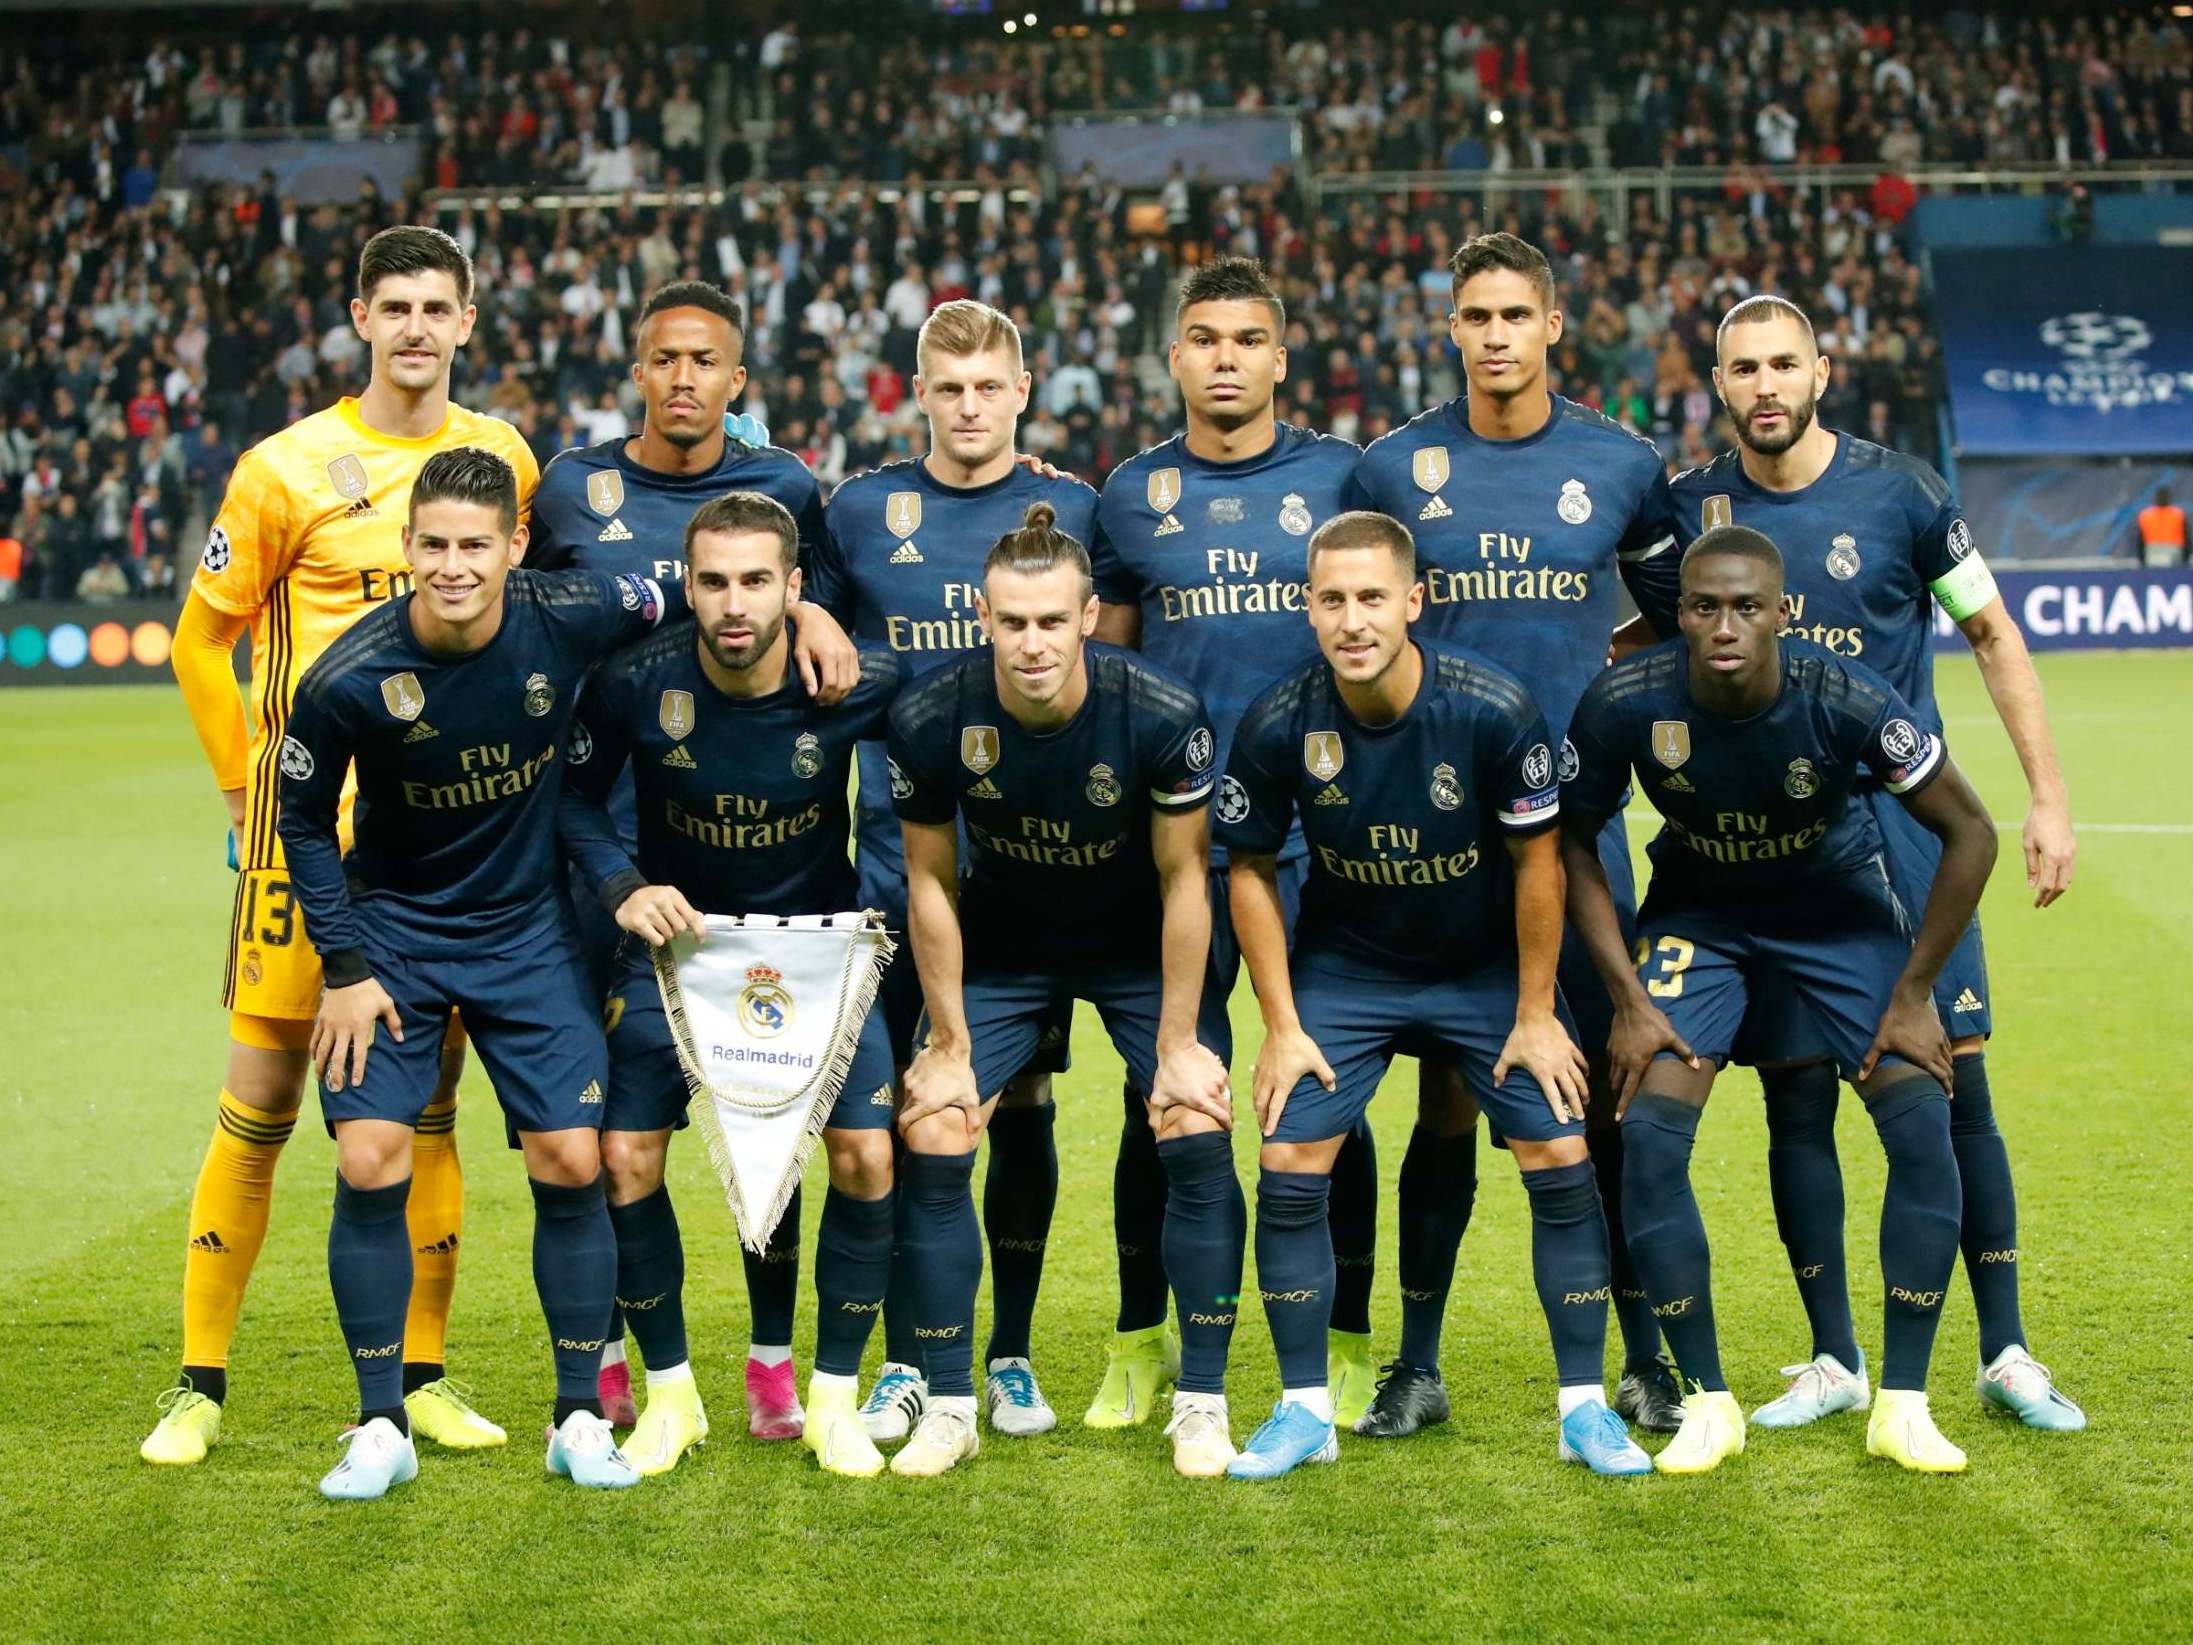 Real Madrid line up before kick-off wearing a dark blue strip